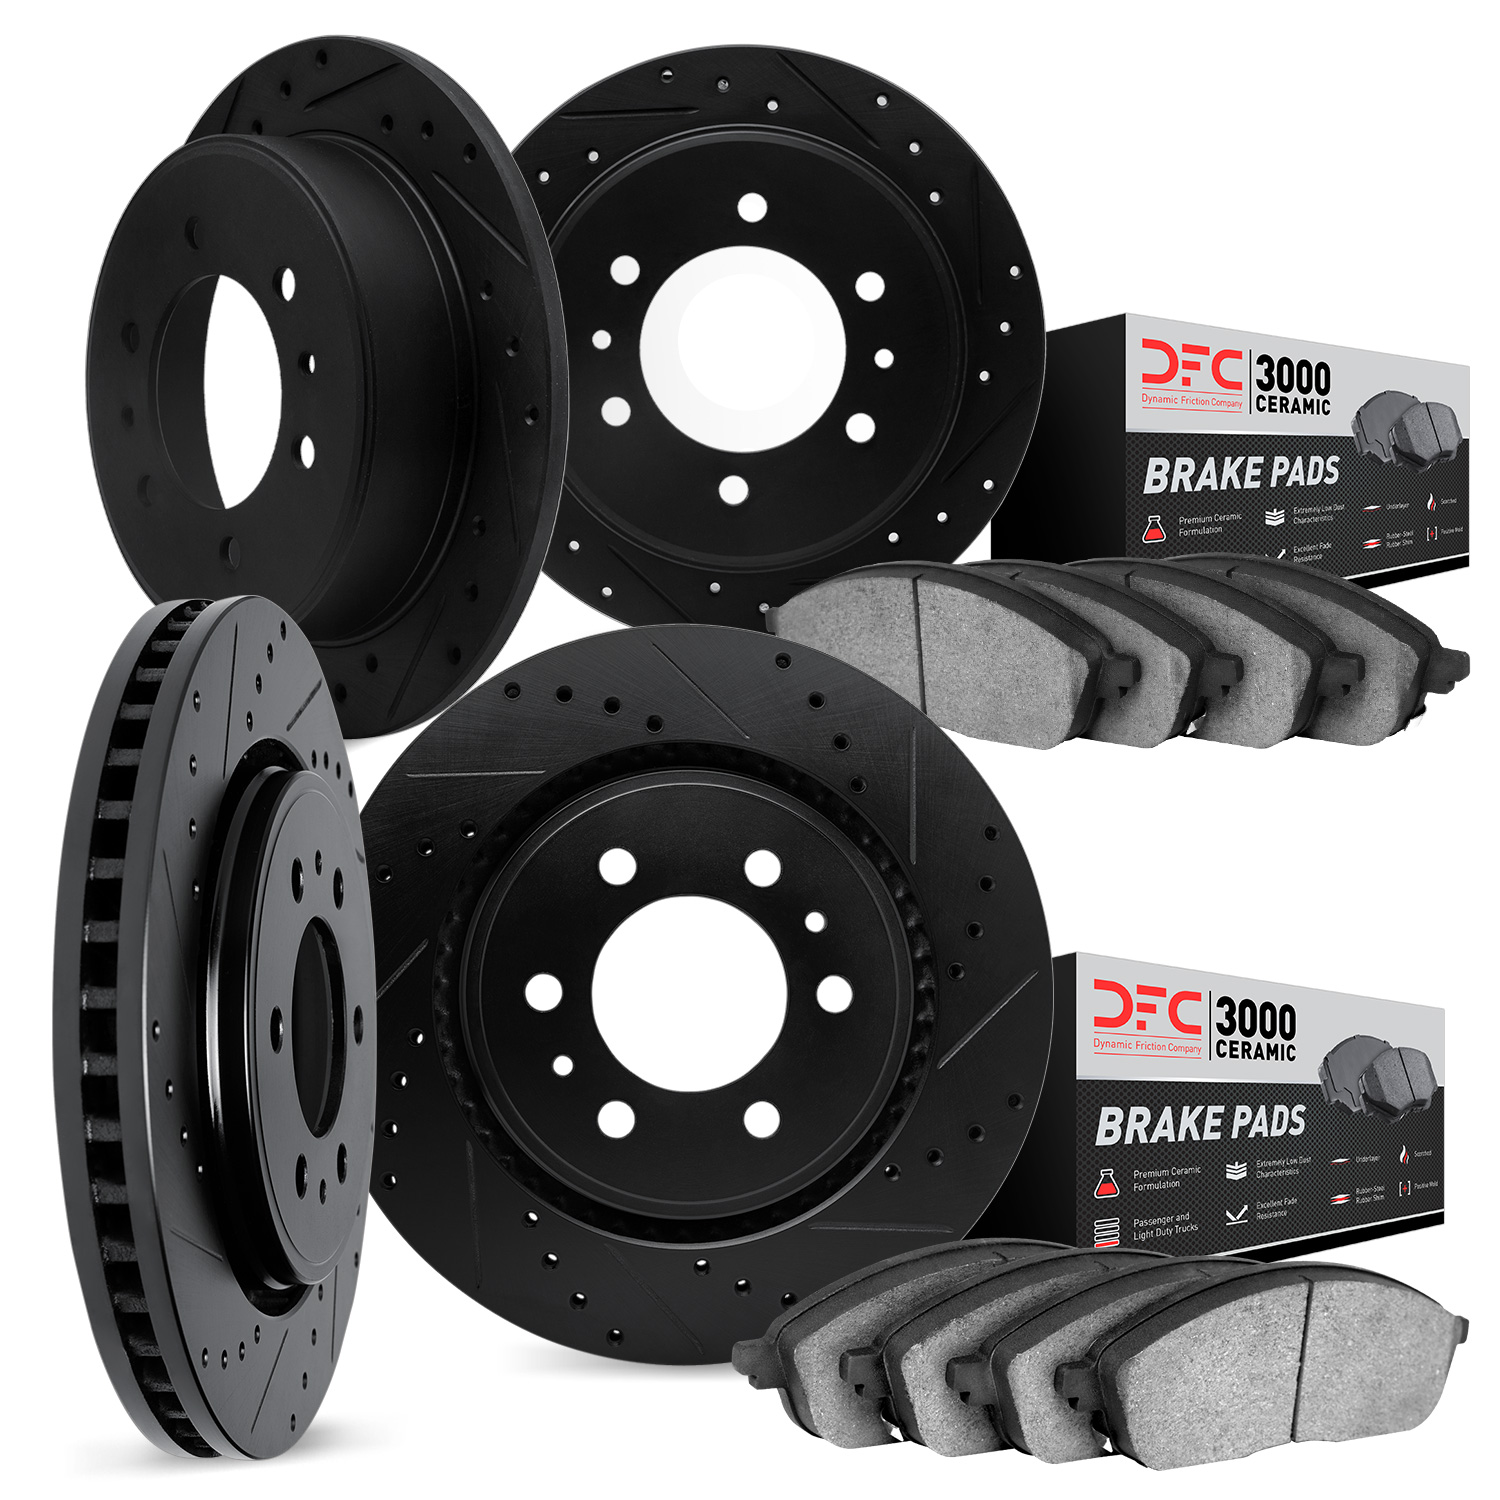 8304-40024 Drilled/Slotted Brake Rotors with 3000-Series Ceramic Brake Pads Kit [Black], 2003-2004 Mopar, Position: Front and Re